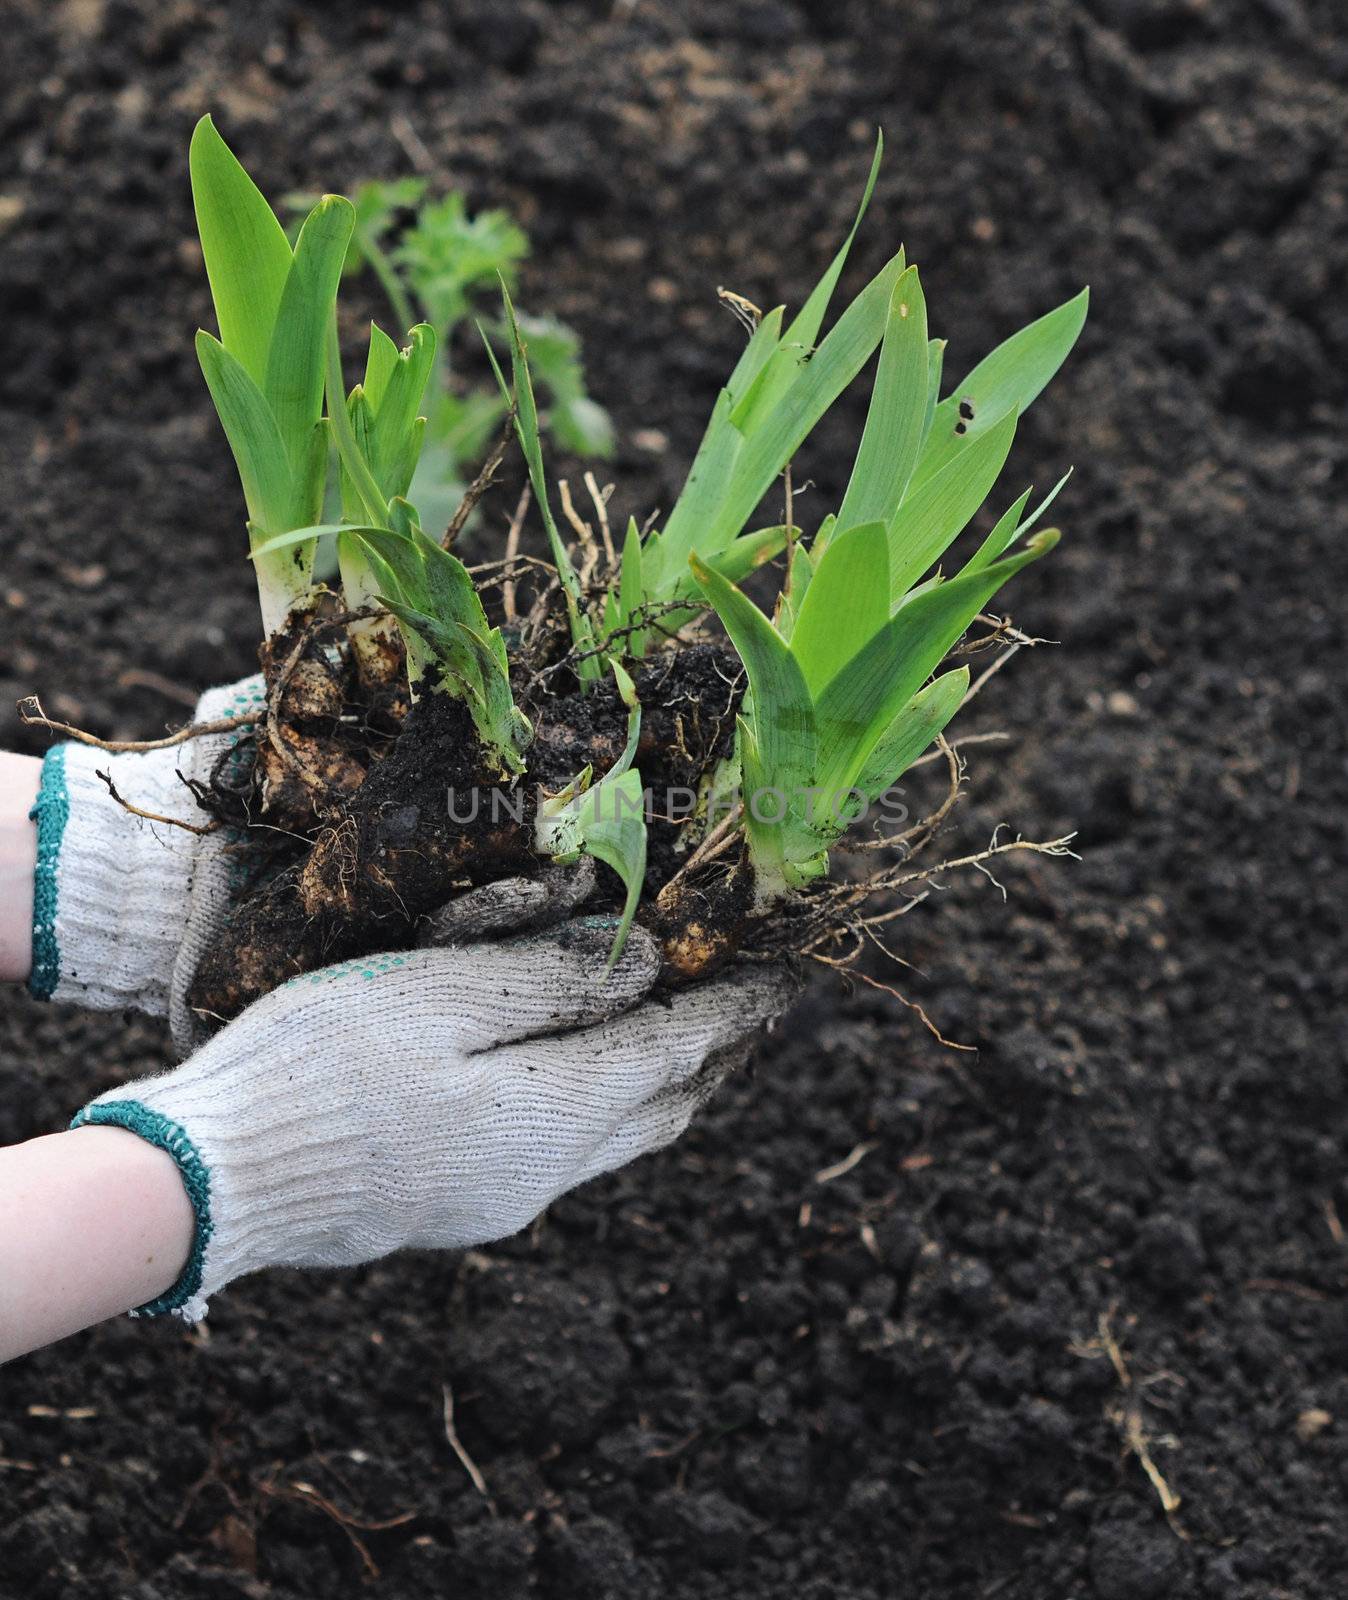 plant in hand over soil background